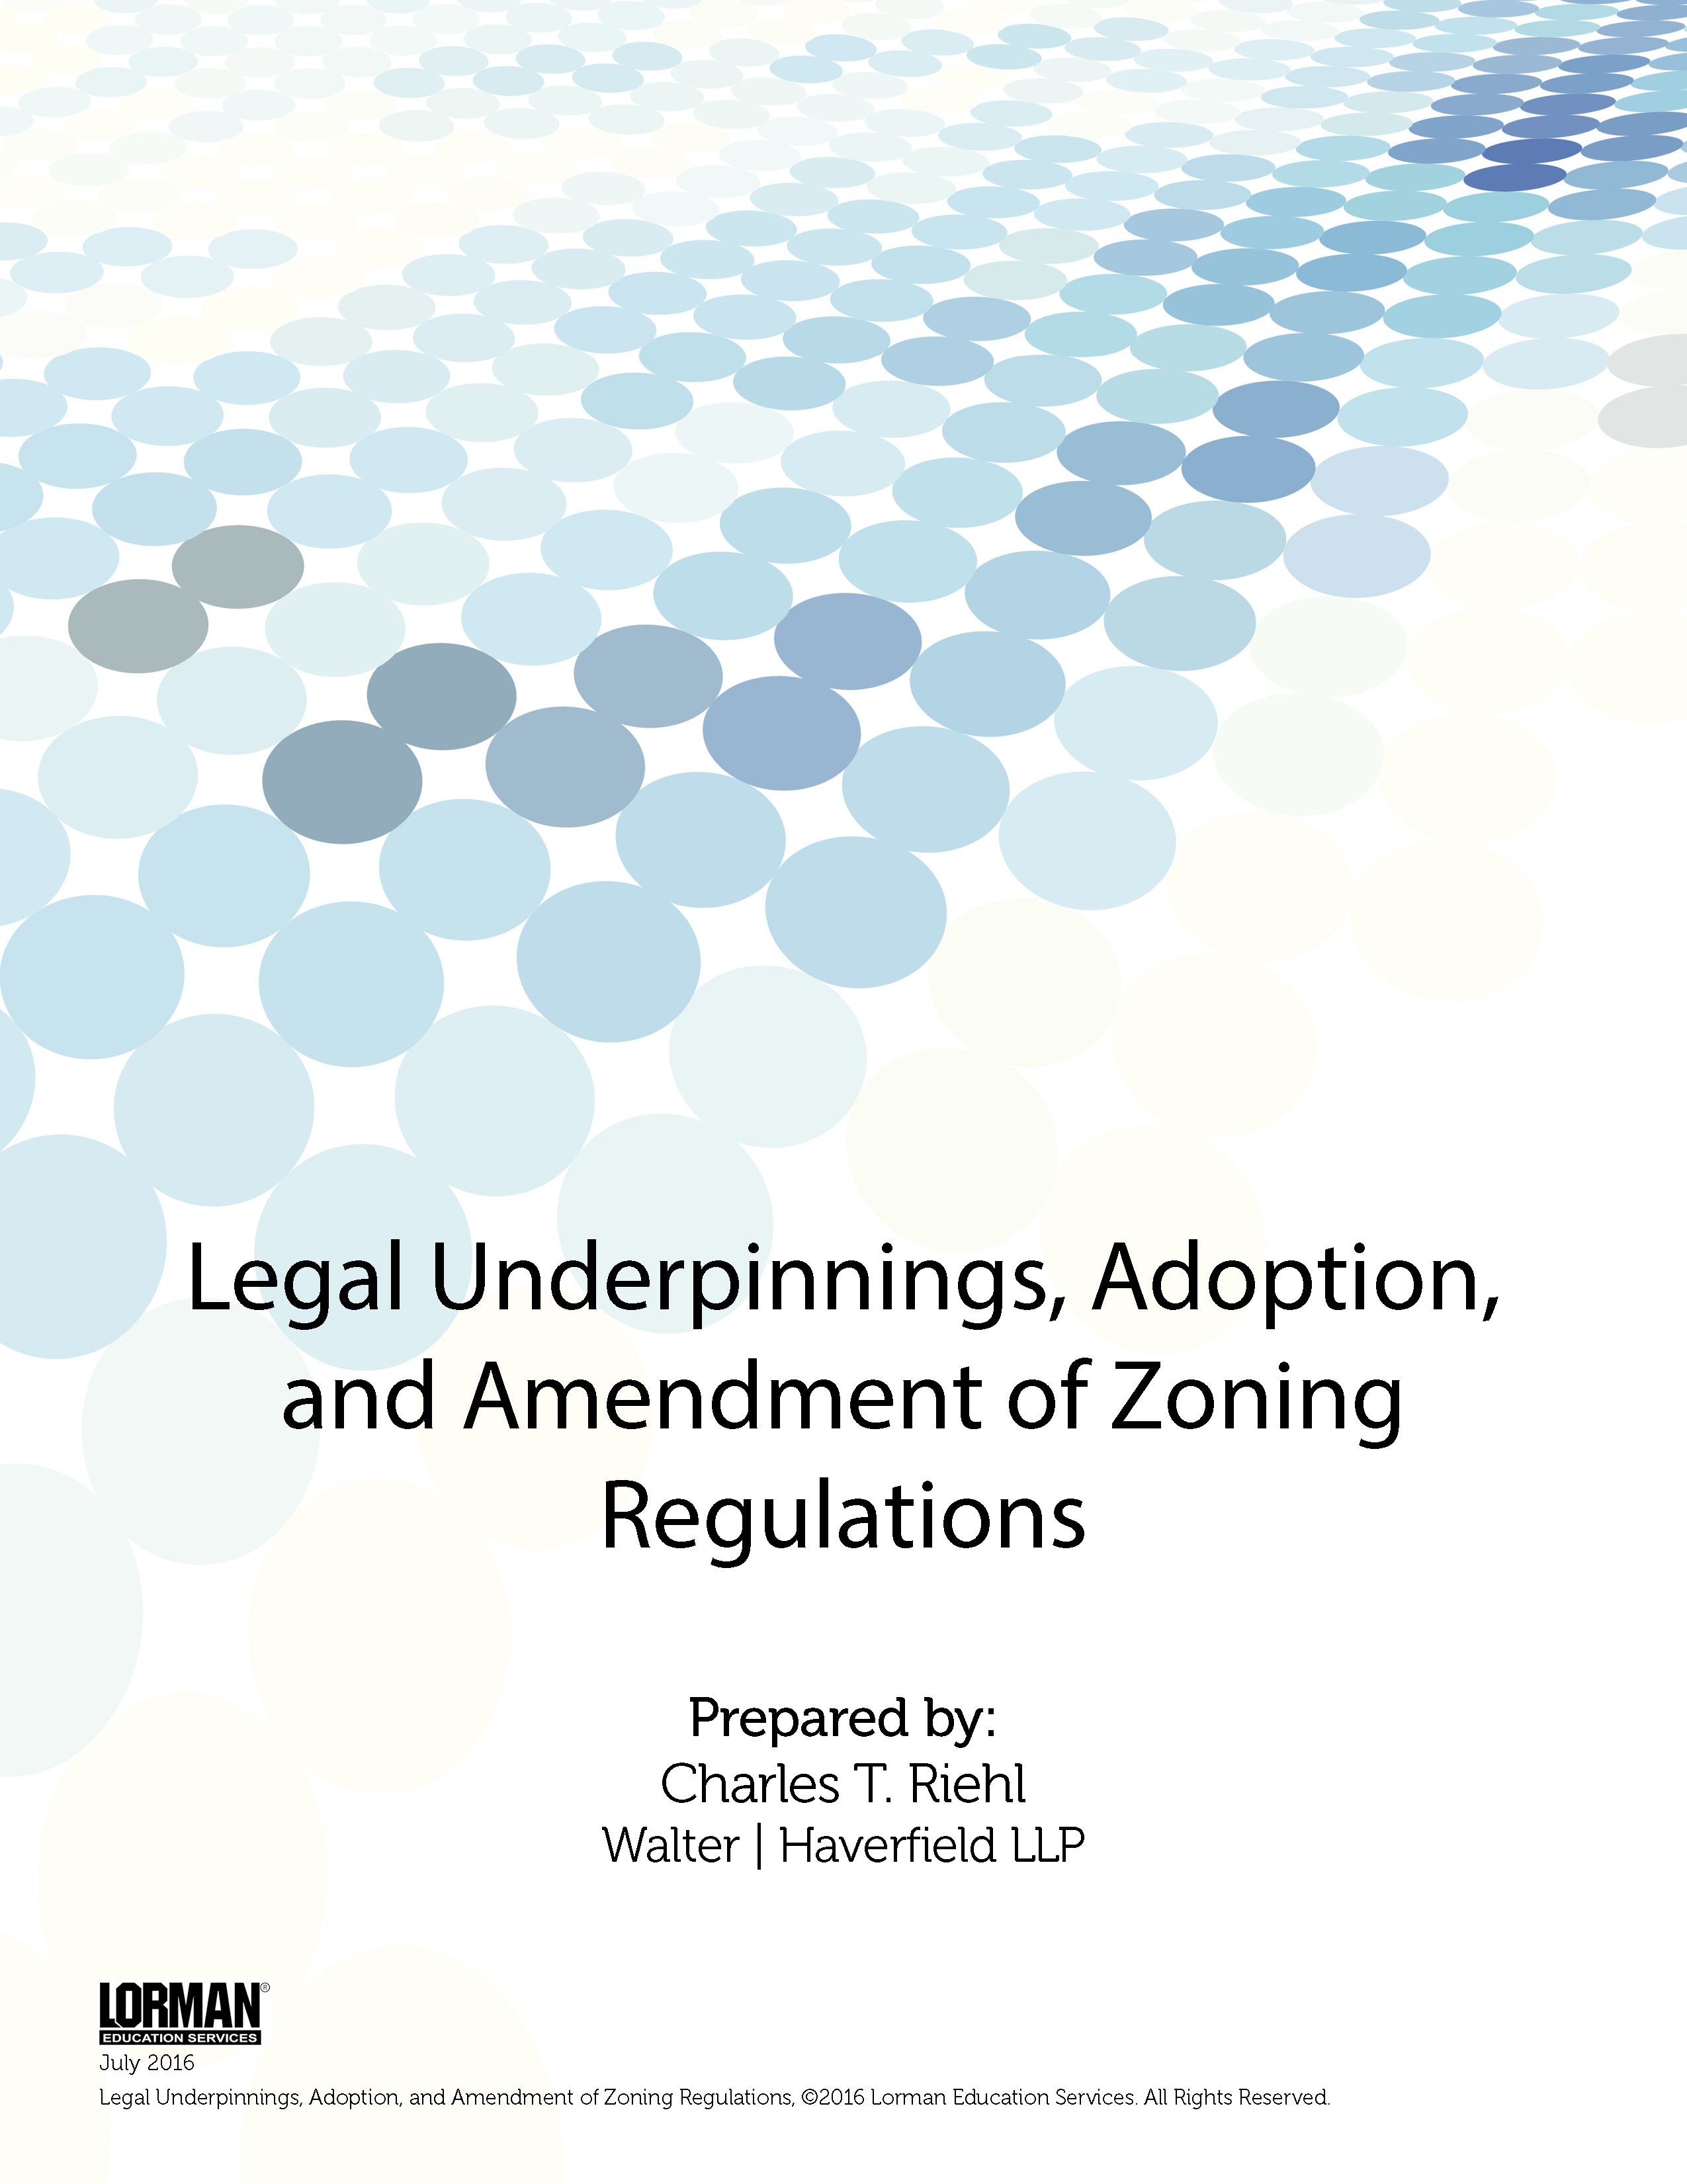 Legal Underpinnings, Adoption, and Amendment of Zoning Regulations in Ohio